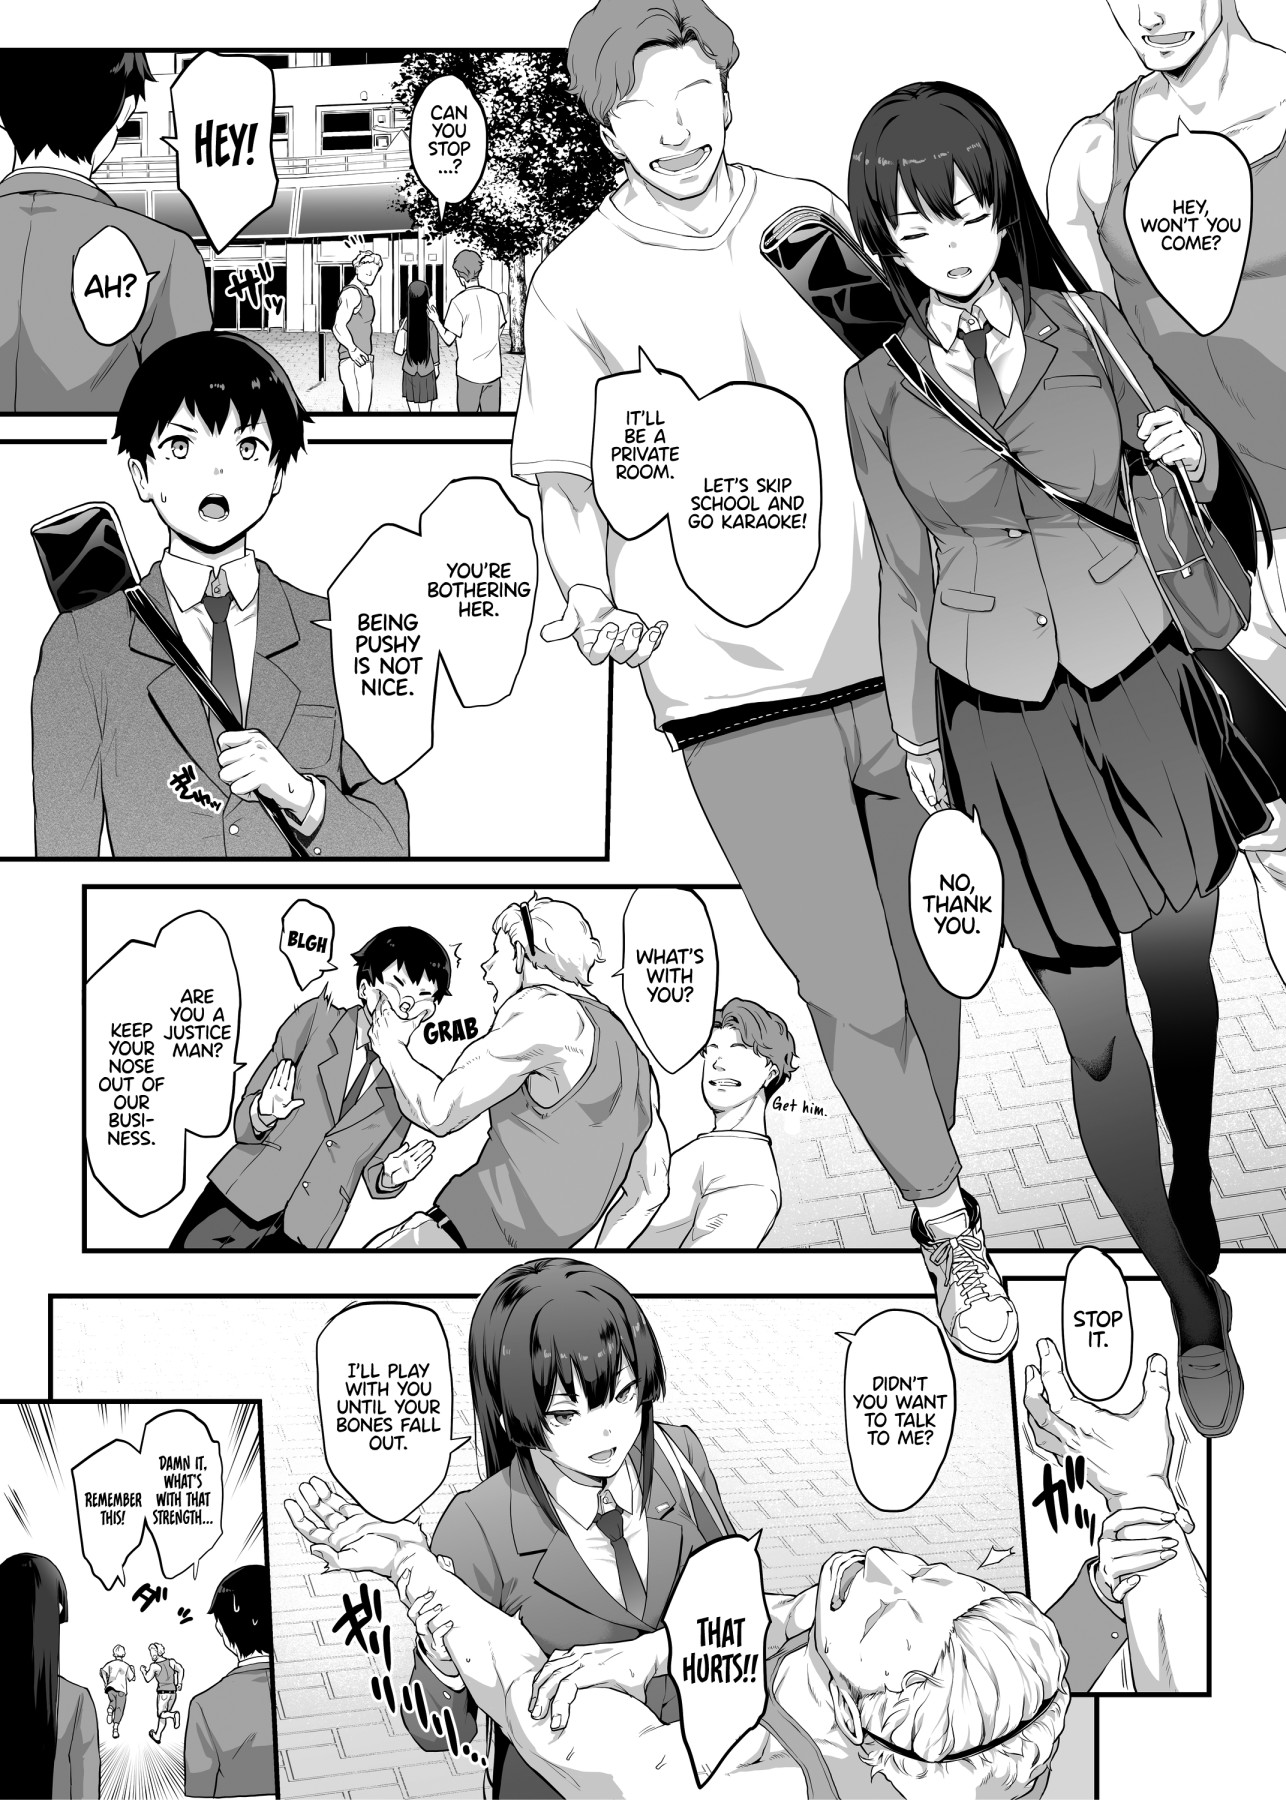 Hentai Manga Comic-There's No Way My Hot Girlfriend Who Is My Childhood Friend And Captain of the Kendo Club Would Fall For Those Playboys-v22m-v22m-v22m-Read-1